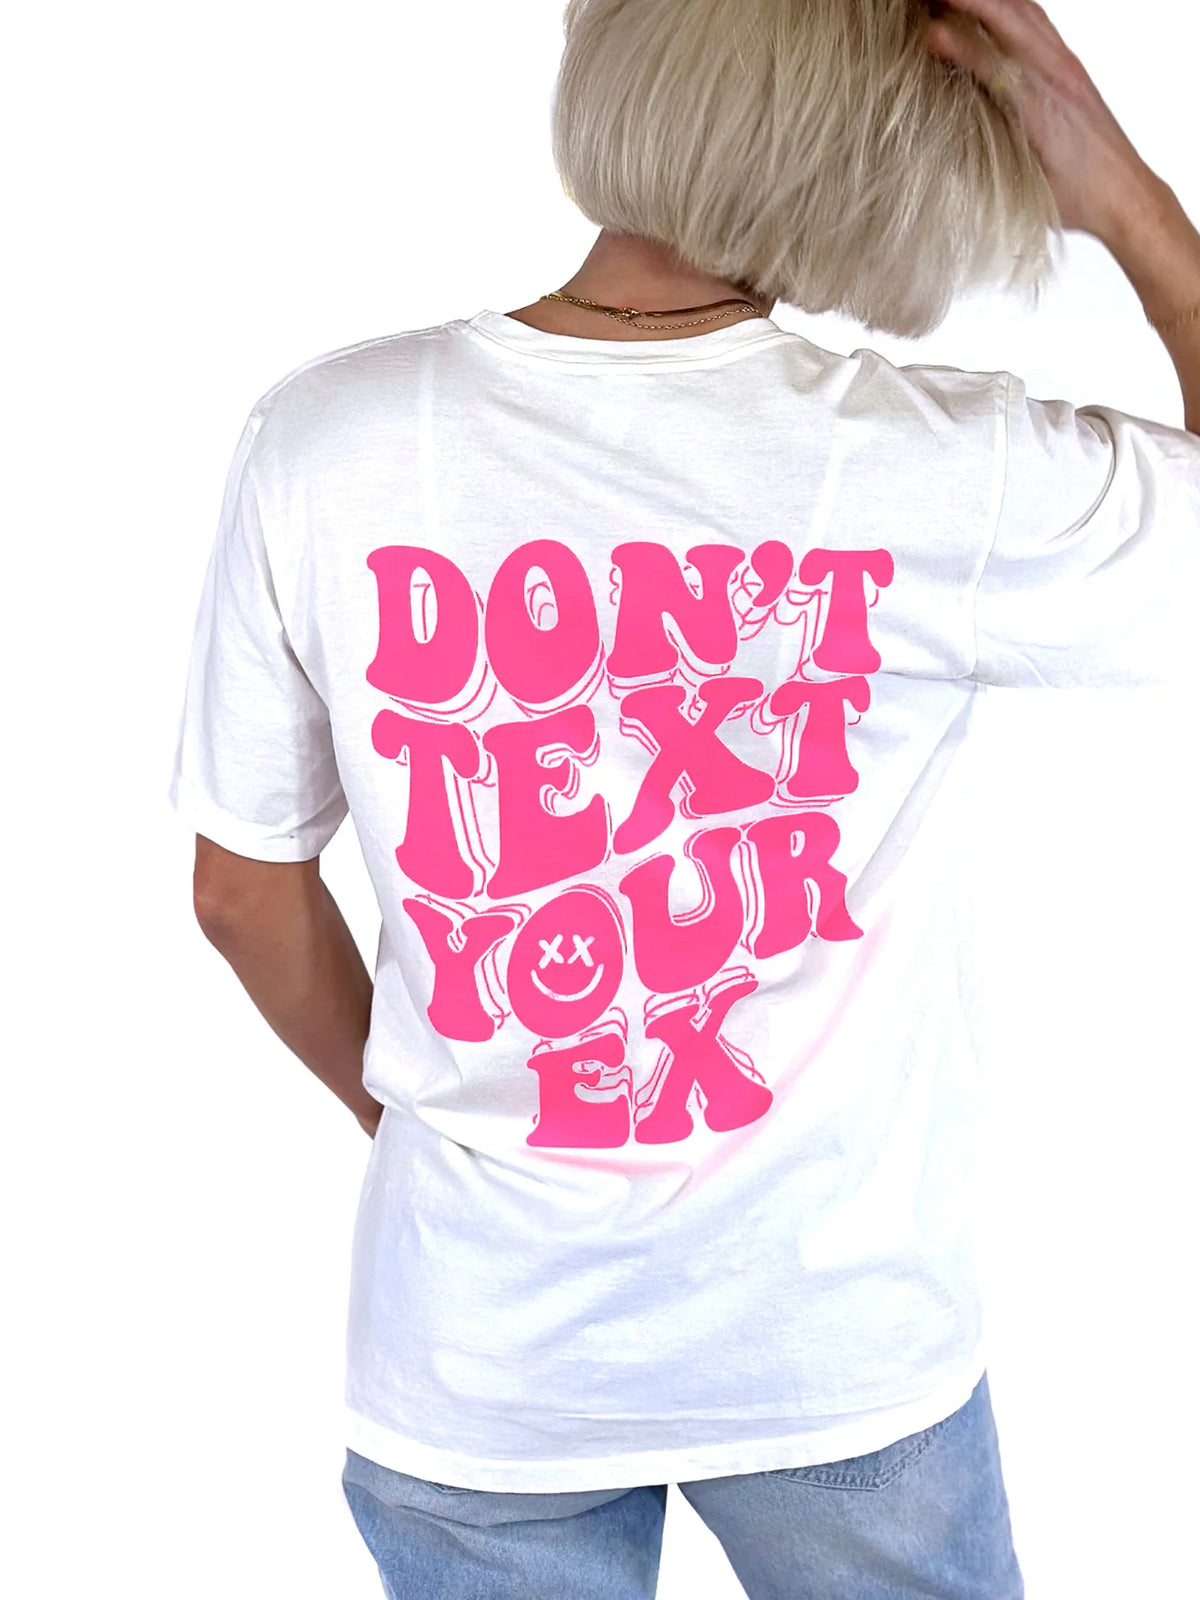 Don't Text your Ex Tee